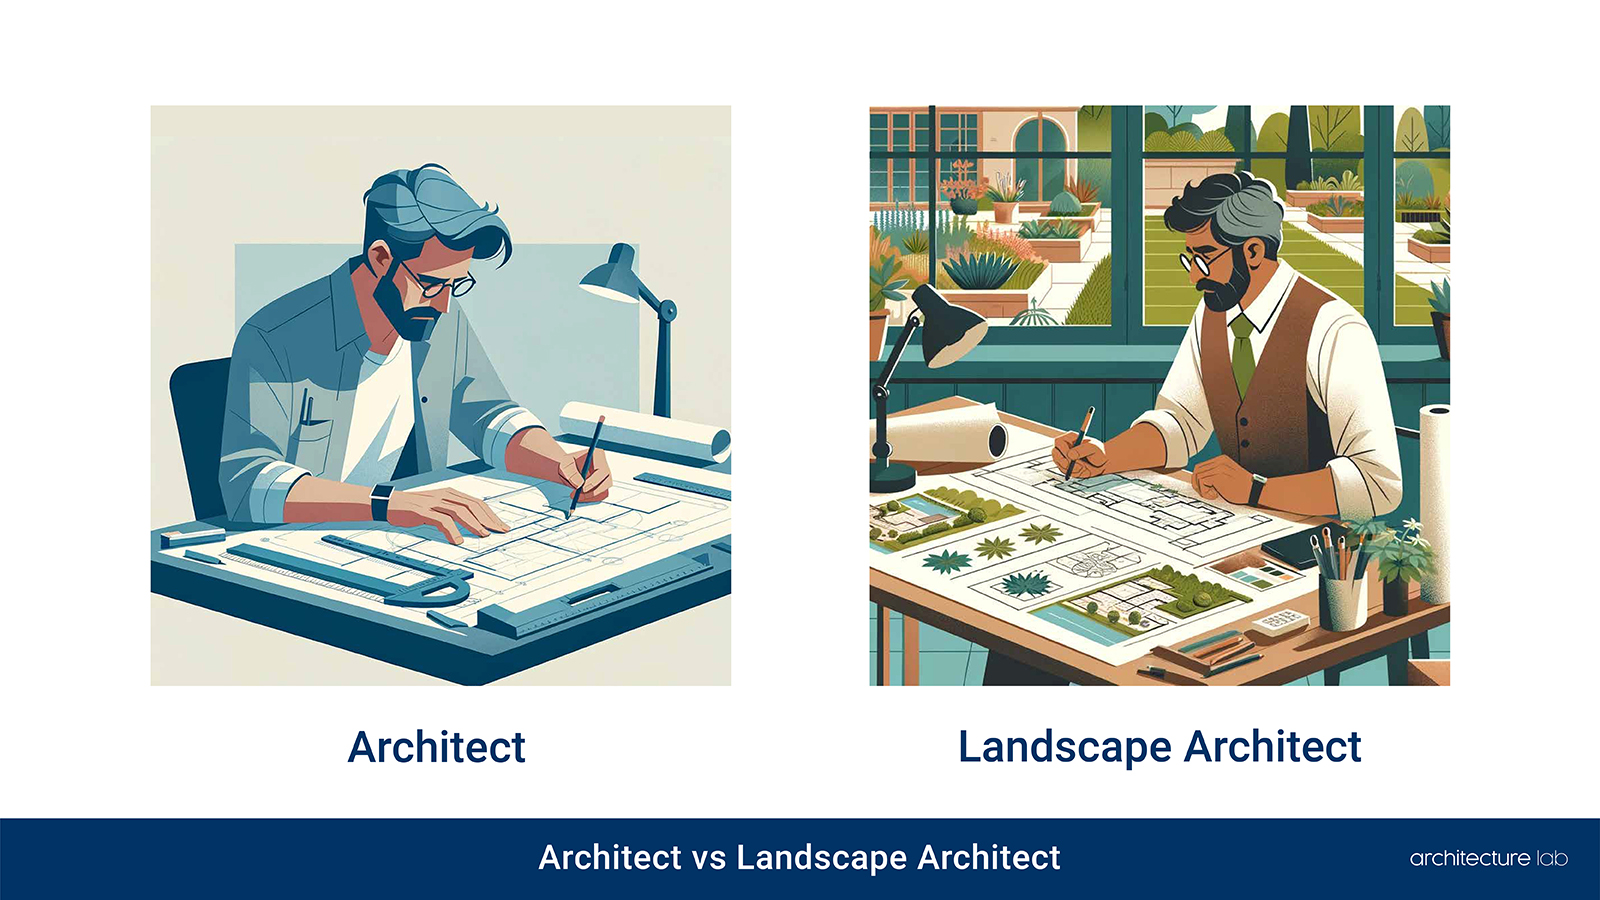 Architect vs. Landscape architect: differences, similarities, duties, salaries, and education